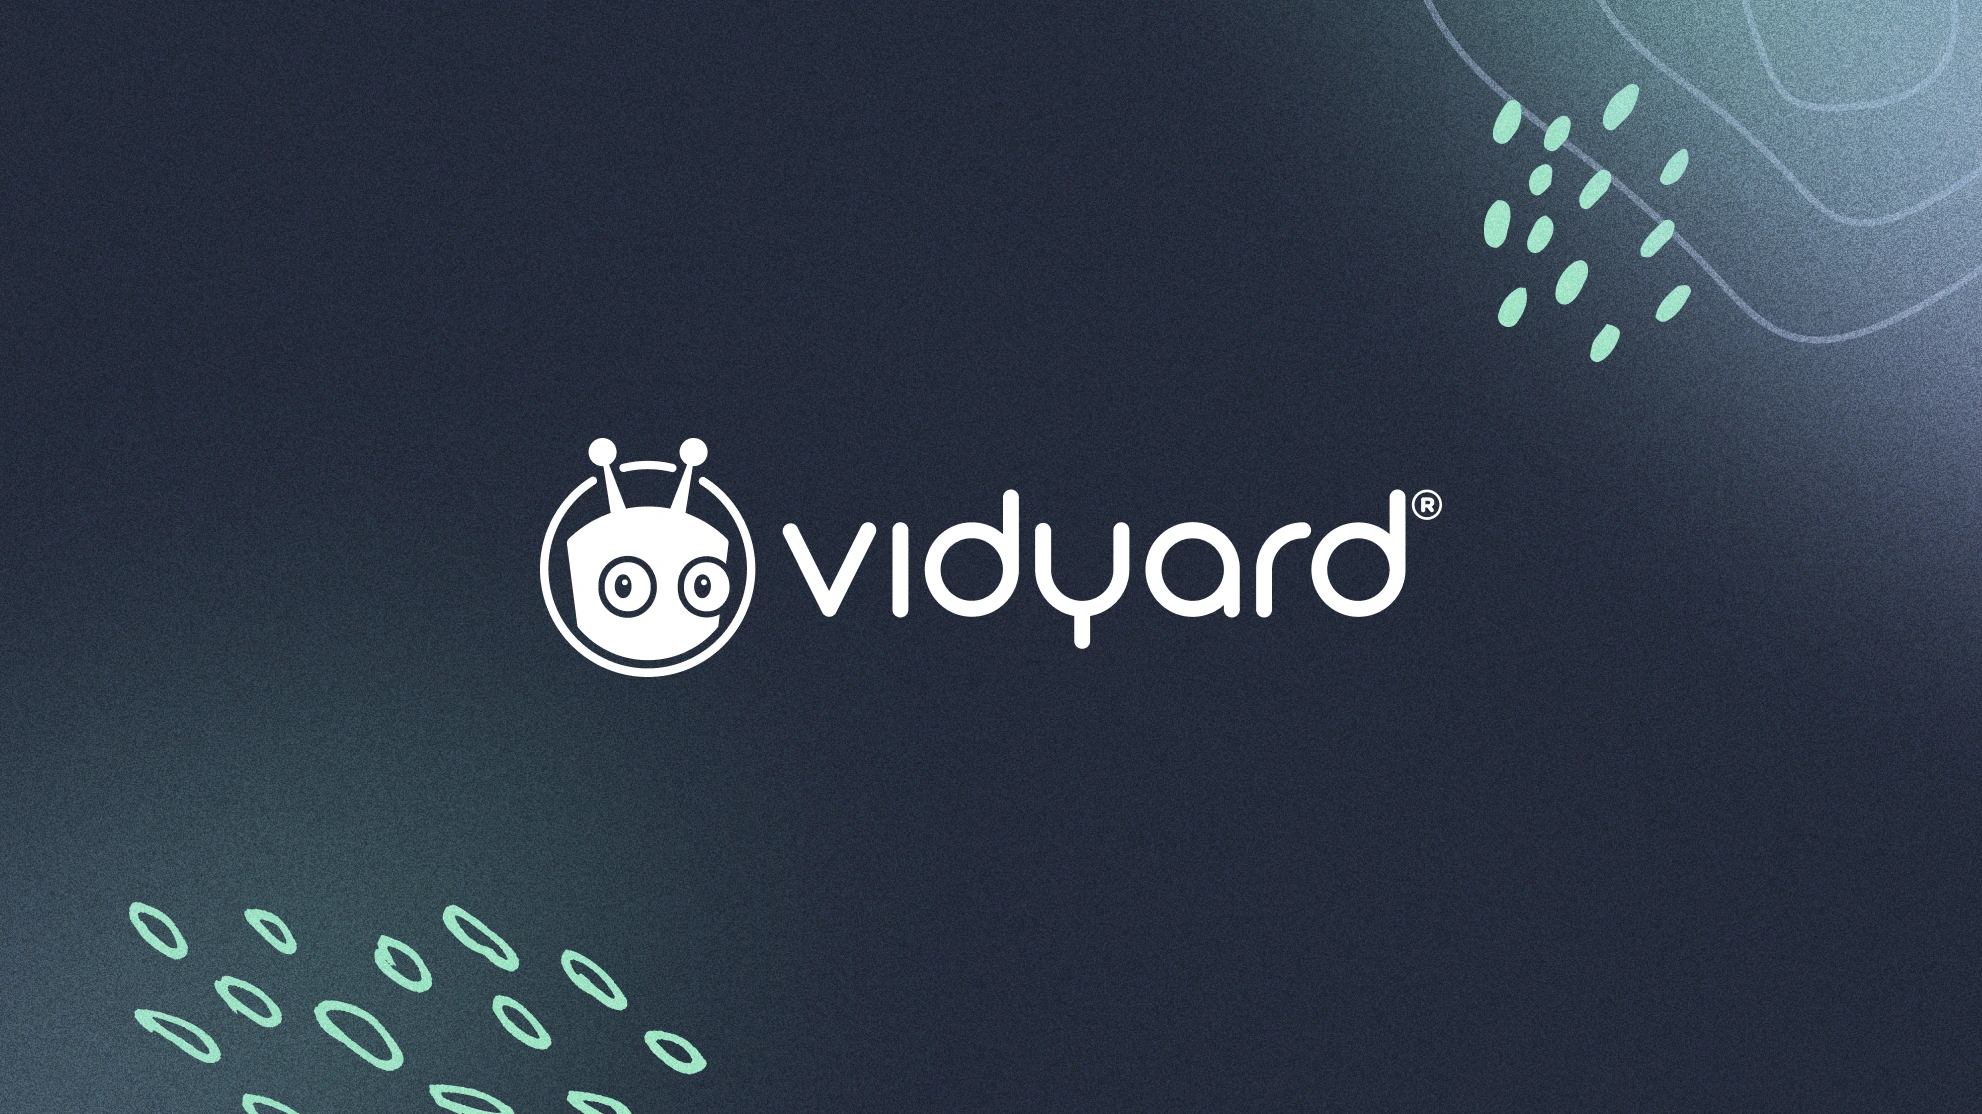 Vidyard Brings the Power of Video to Any Business App with Vidyard GoVideo Partner Ecosystem